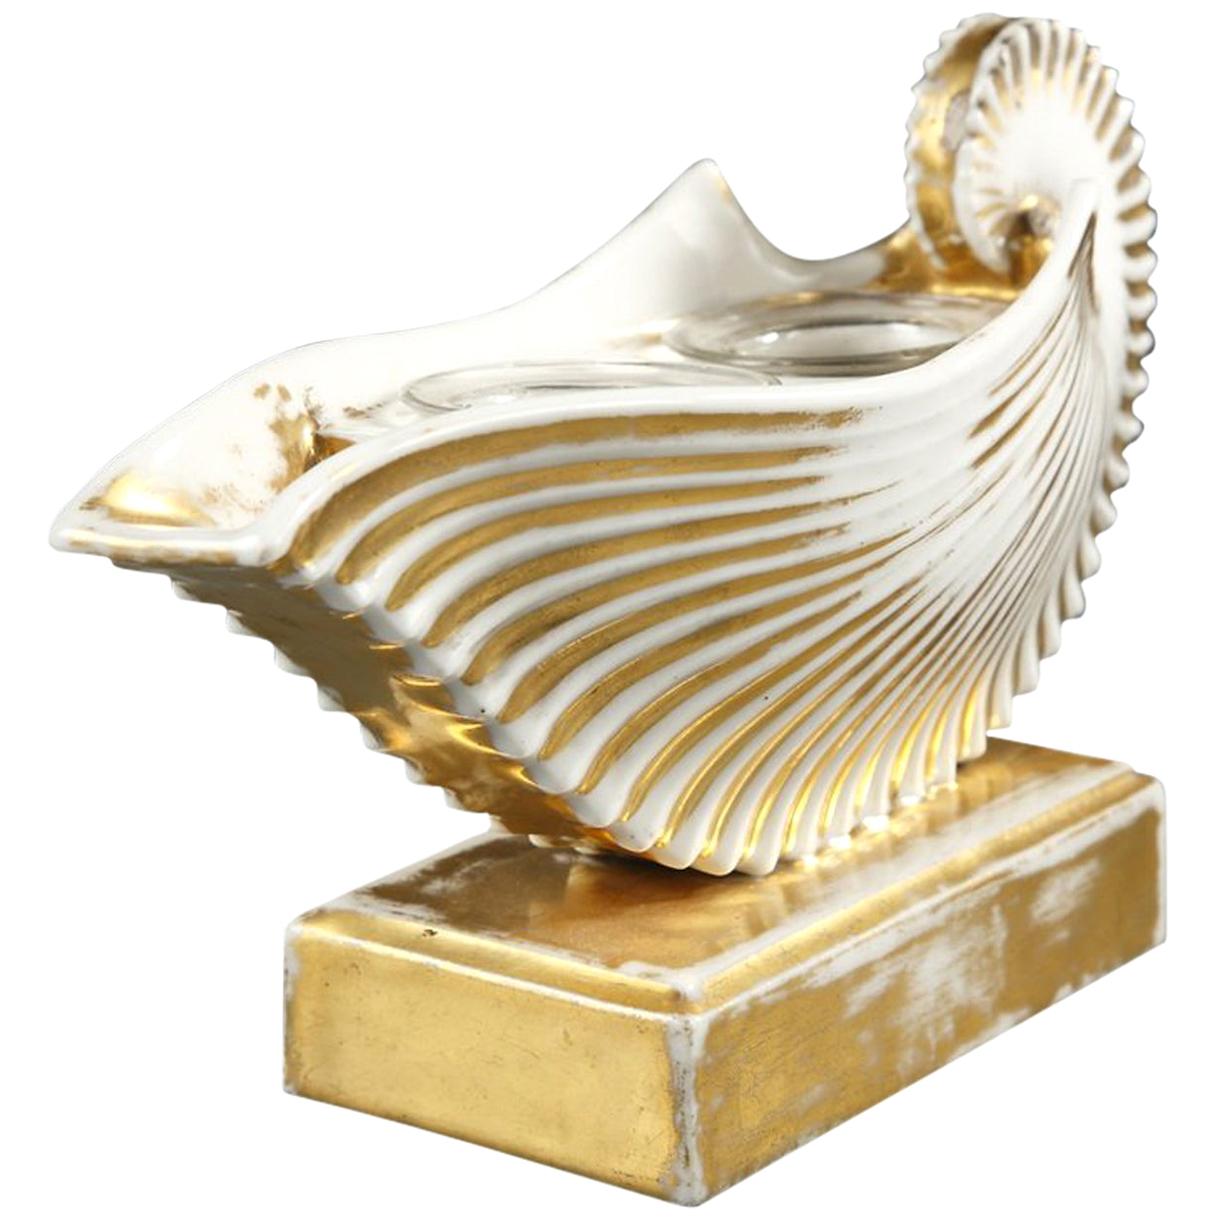 19th Century Shell-Shaped, White Porcelain Inkwell